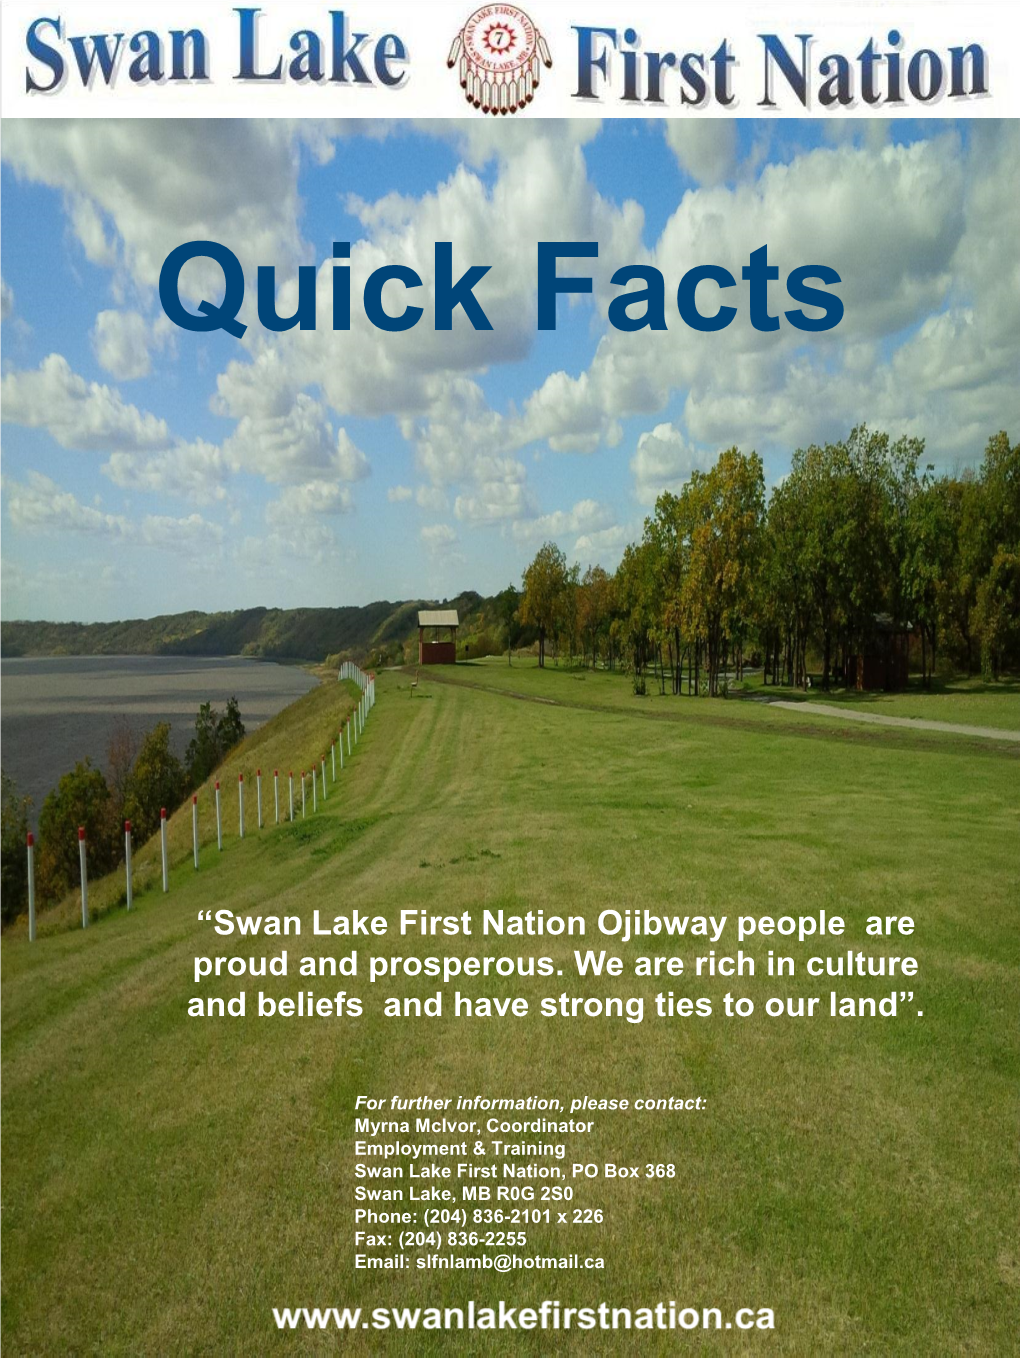 Quick Facts “Swan Lake First Nation Ojibway People Are Proud and Prosperous. We Are Rich in Culture and Beliefs and Have Strong Ties to Our Land”